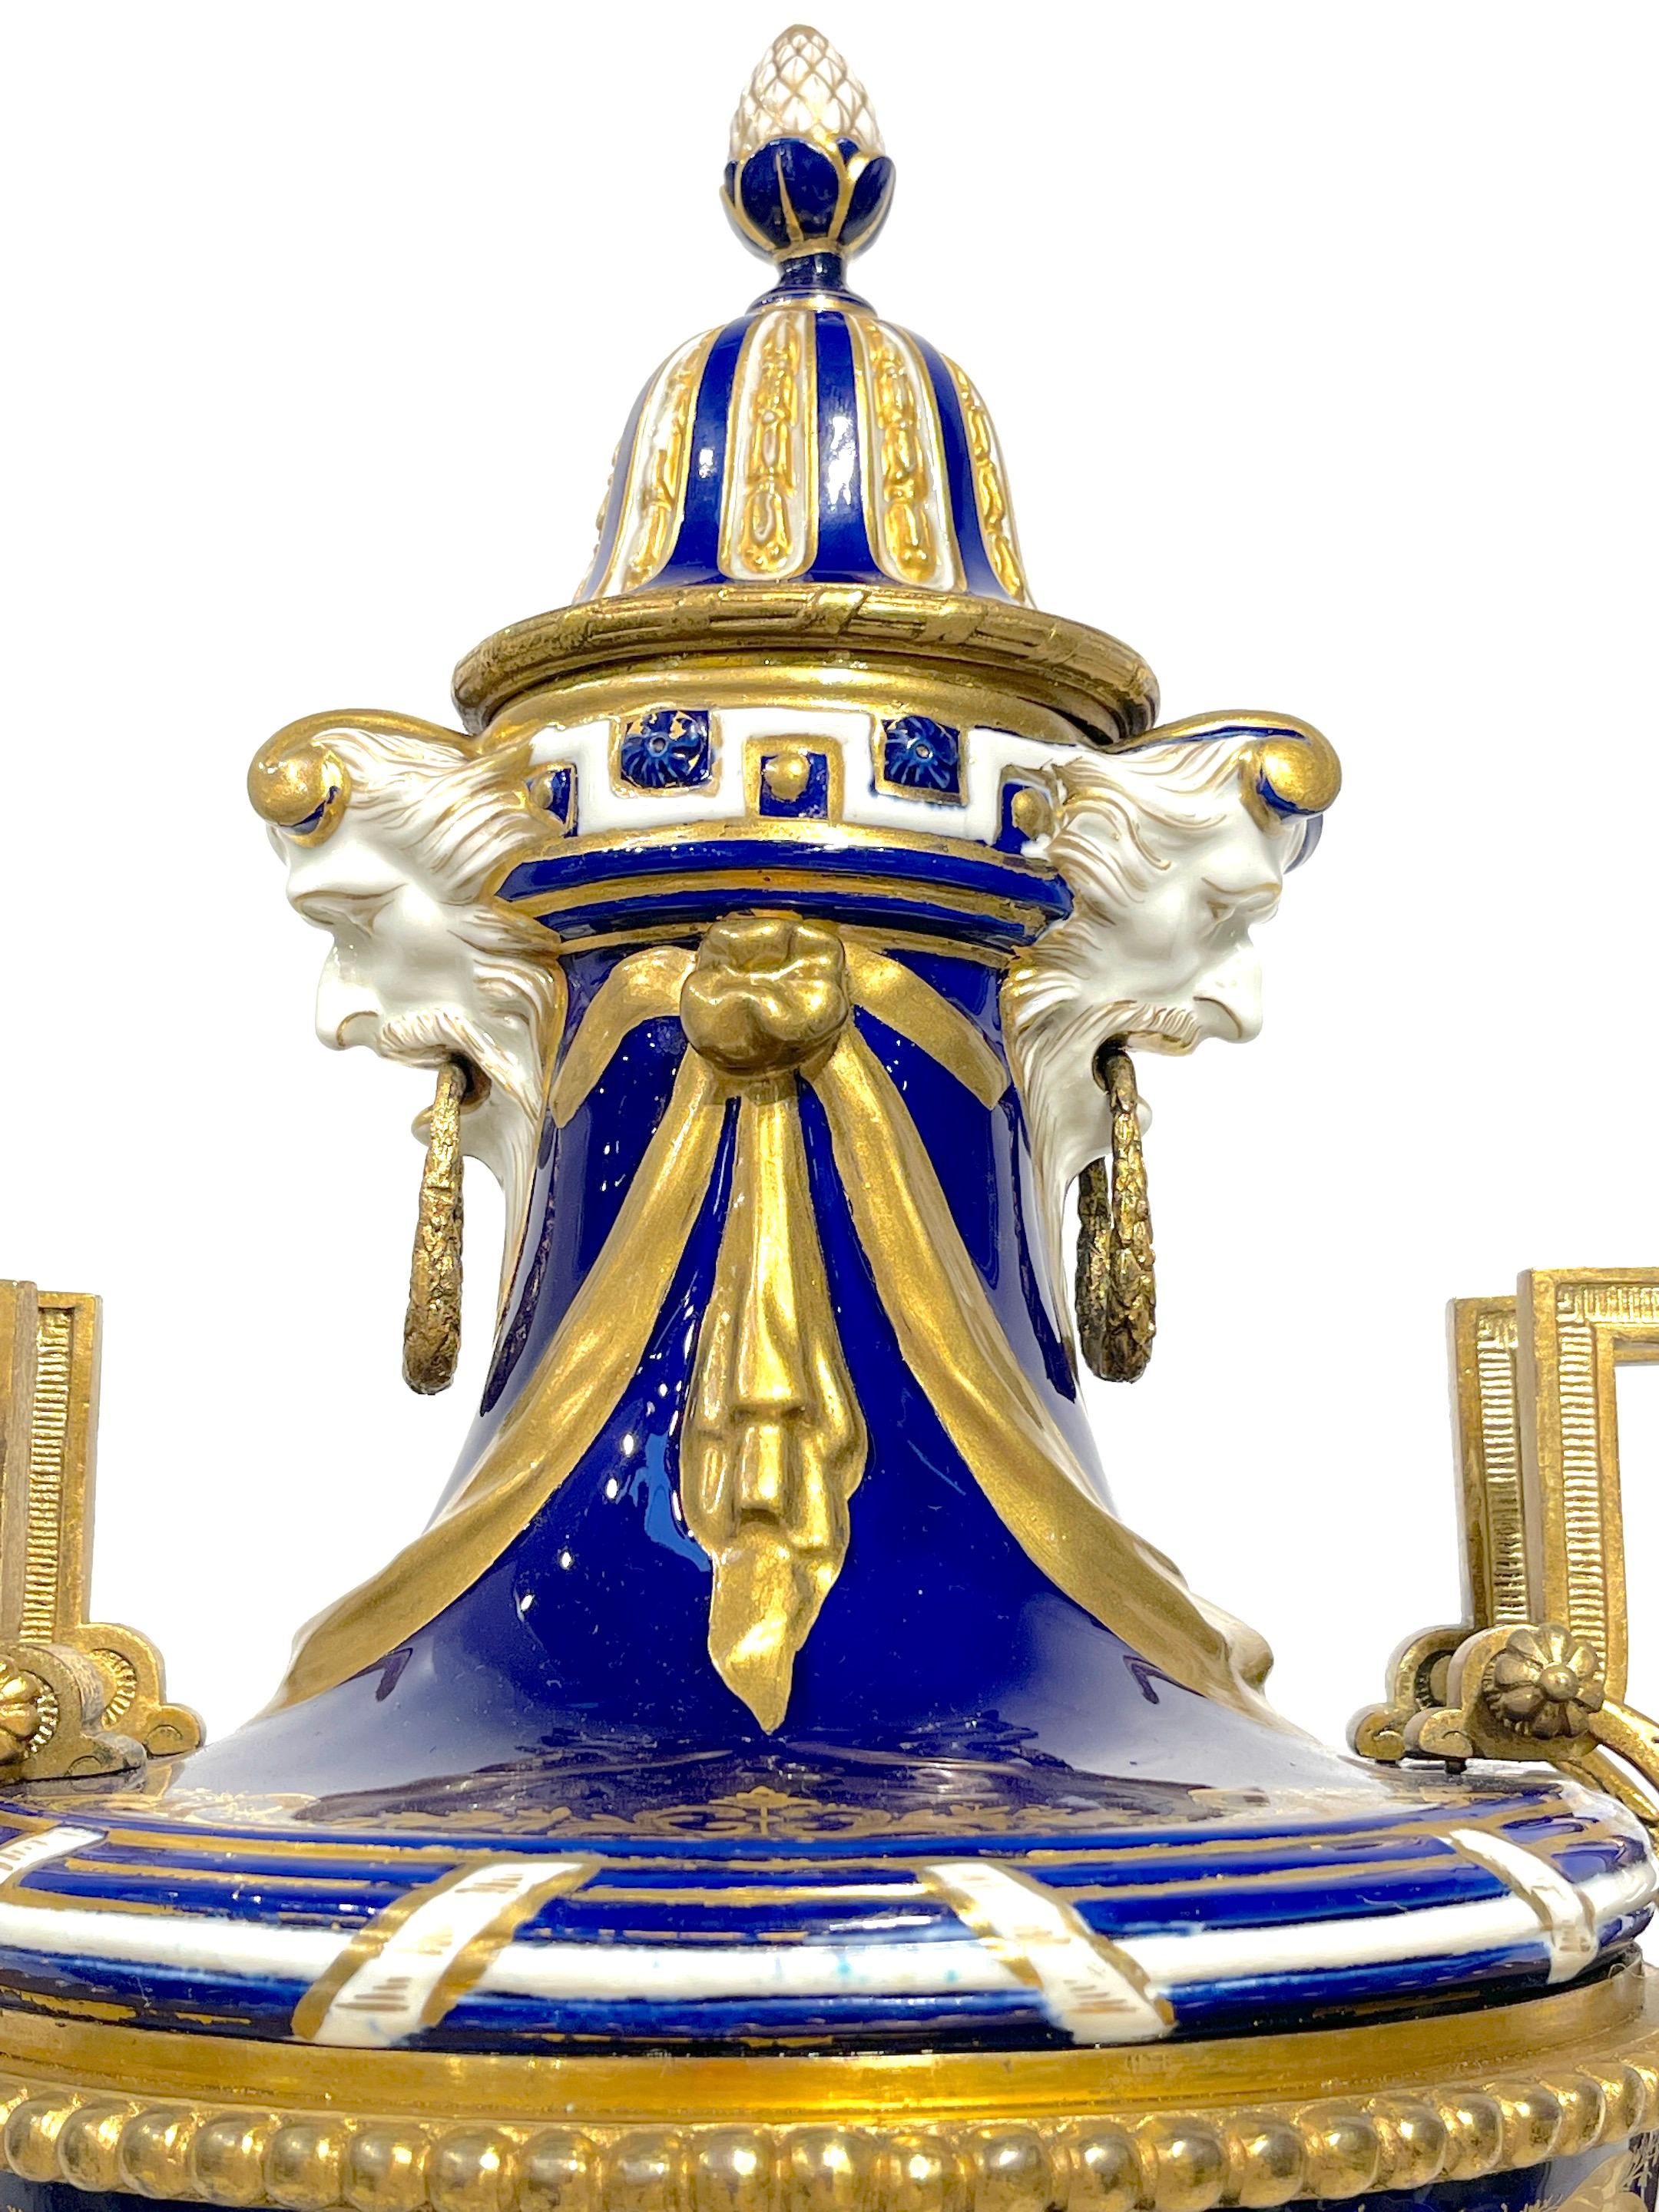 19th Century Sevres Cobalt & Ormolu Louis XIII Hunt Scene Vase & Cover In Good Condition For Sale In West Palm Beach, FL